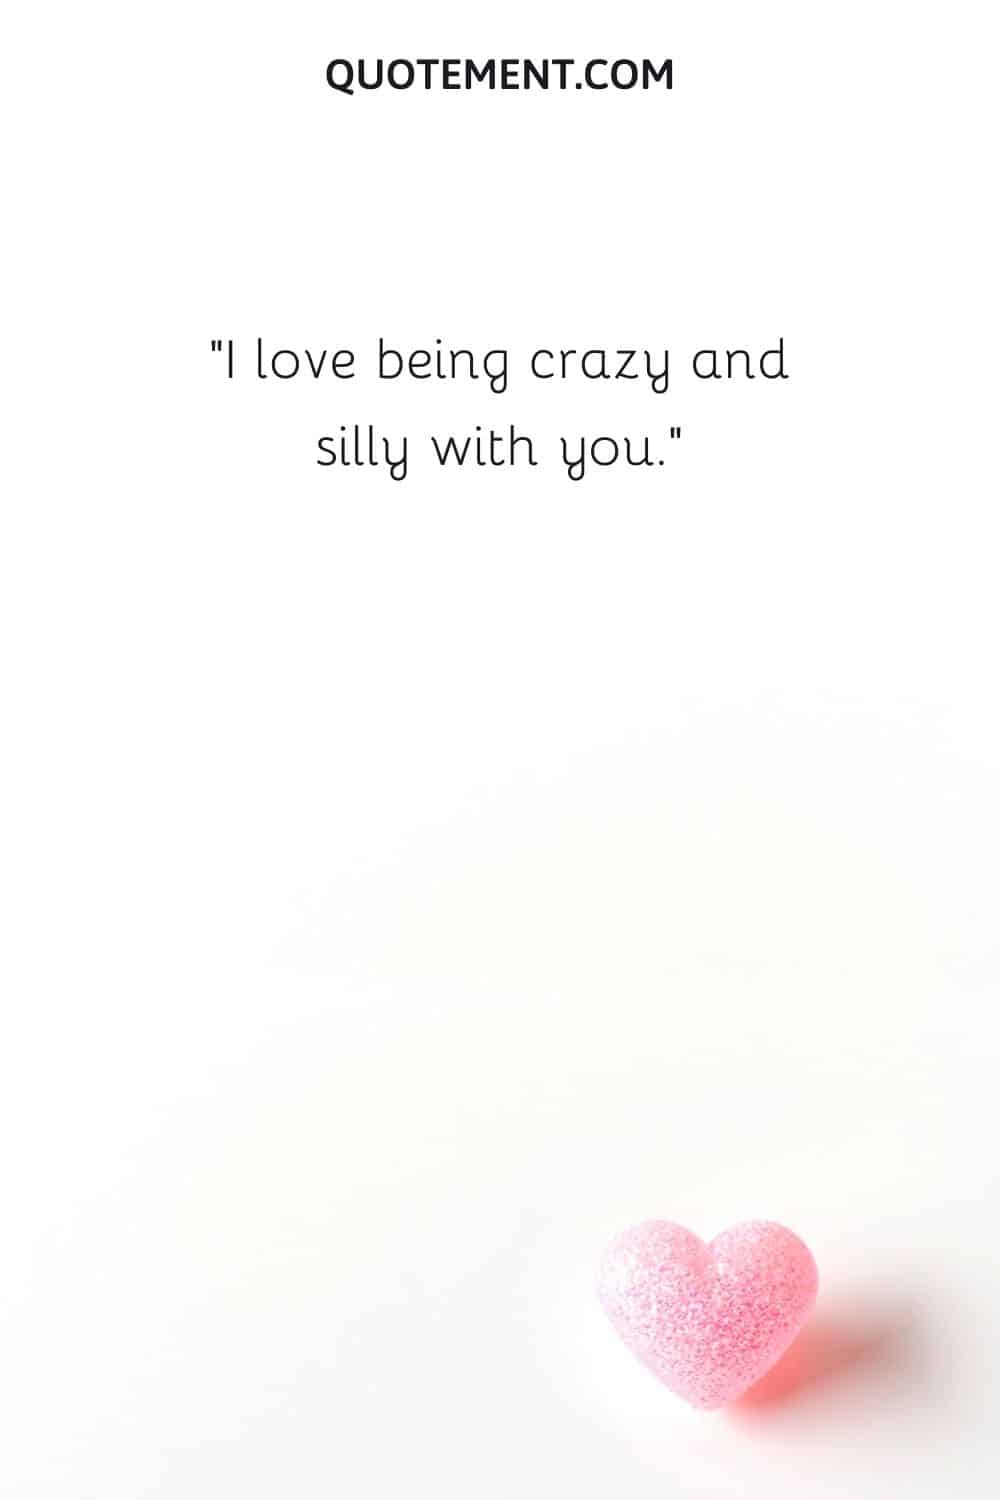 I love being crazy and silly with you.